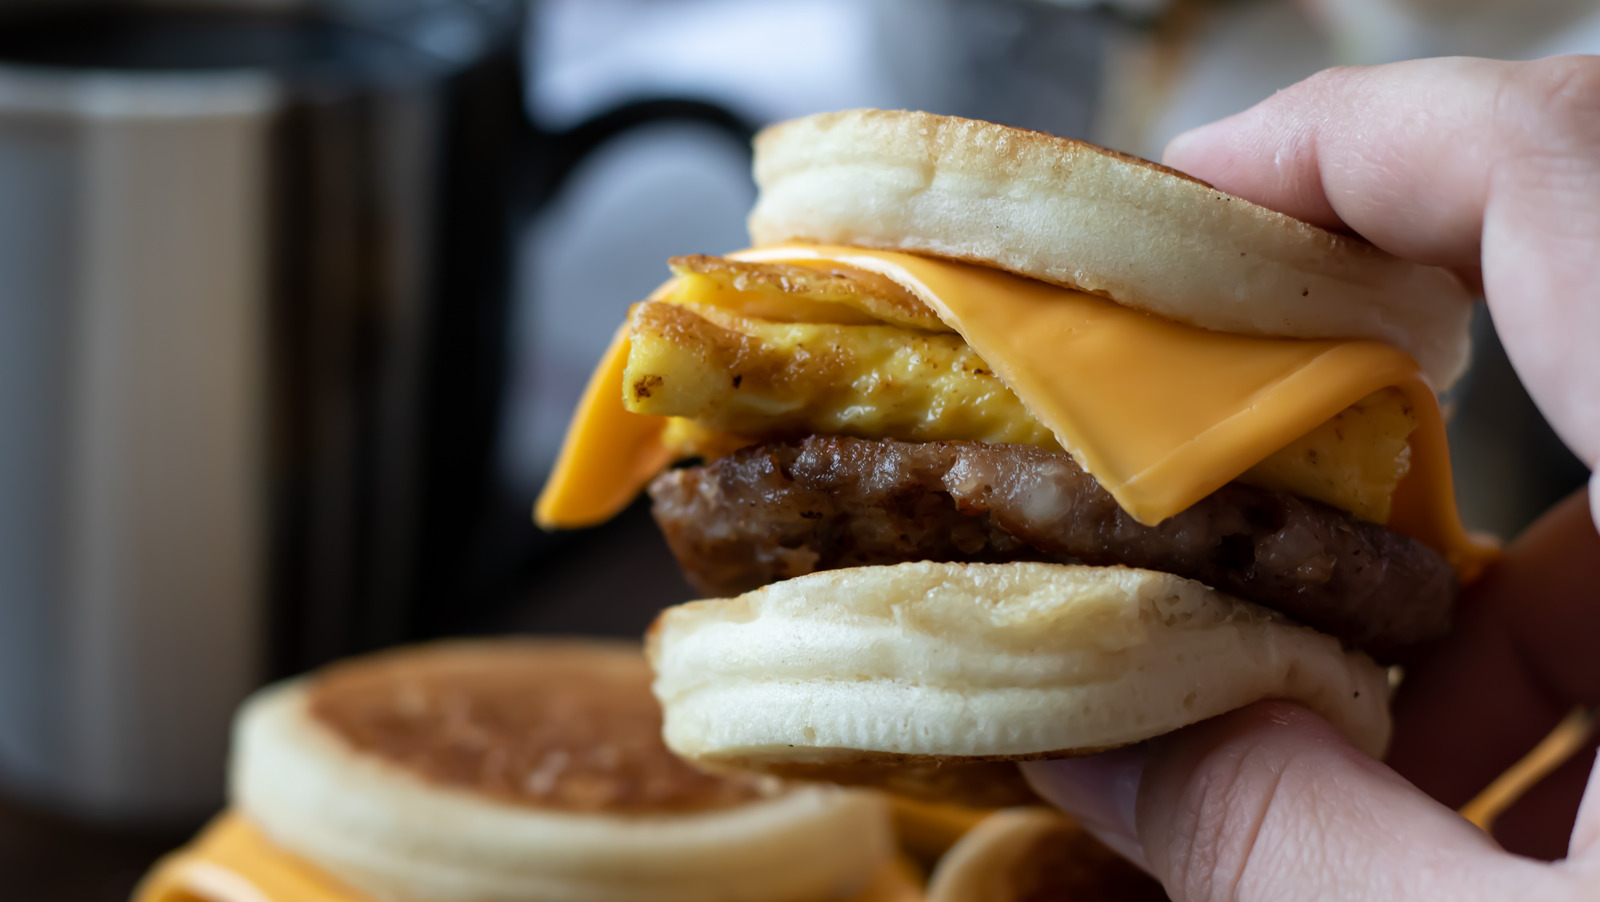 https://www.mashed.com/img/gallery/copycat-mcdonalds-sausage-egg-cheese-mcgriddle-recipe/l-intro-1619124814.jpg